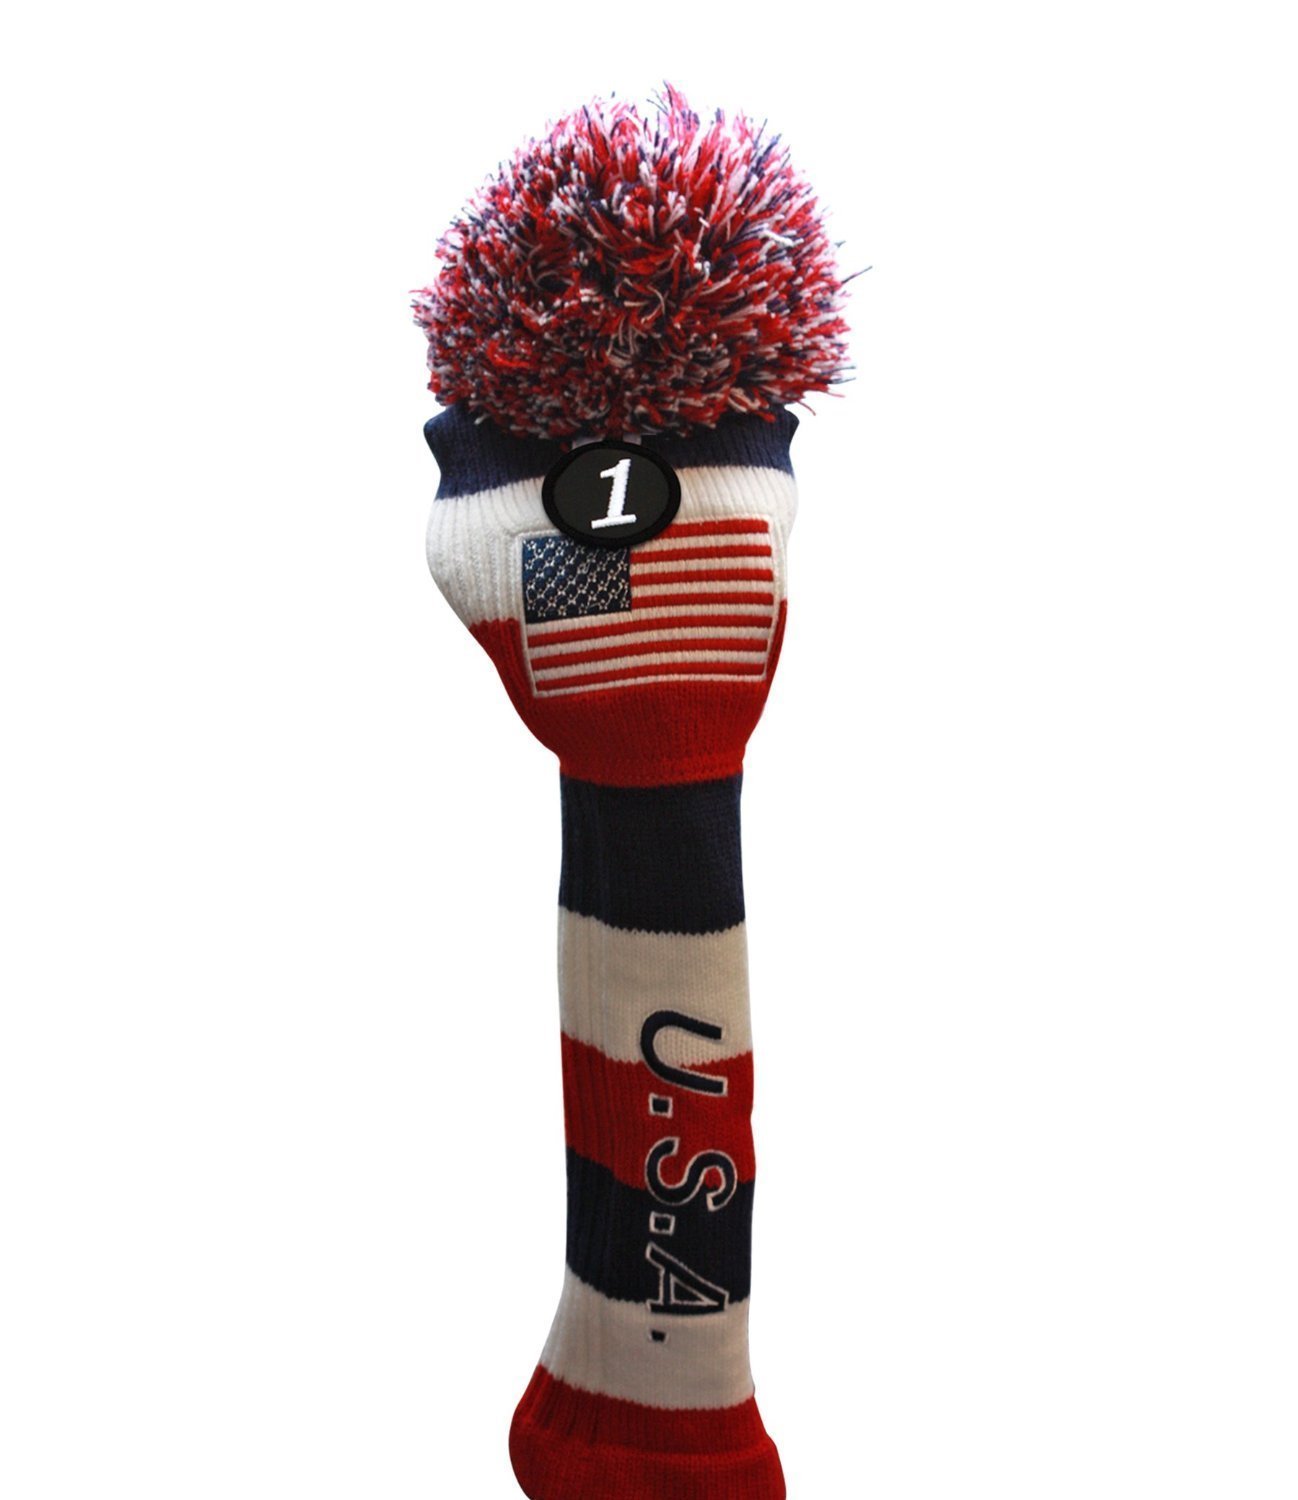 USA Majek Golf Driver 1 3 5 7 Fairway Woods Headcovers Pom Pom Knit Limited Edition Vintage Classic Traditional Flag Stars Red White Blue Stripes Retro Head Cover Fits 460cc Drivers and 260cc Woods - image 2 of 8